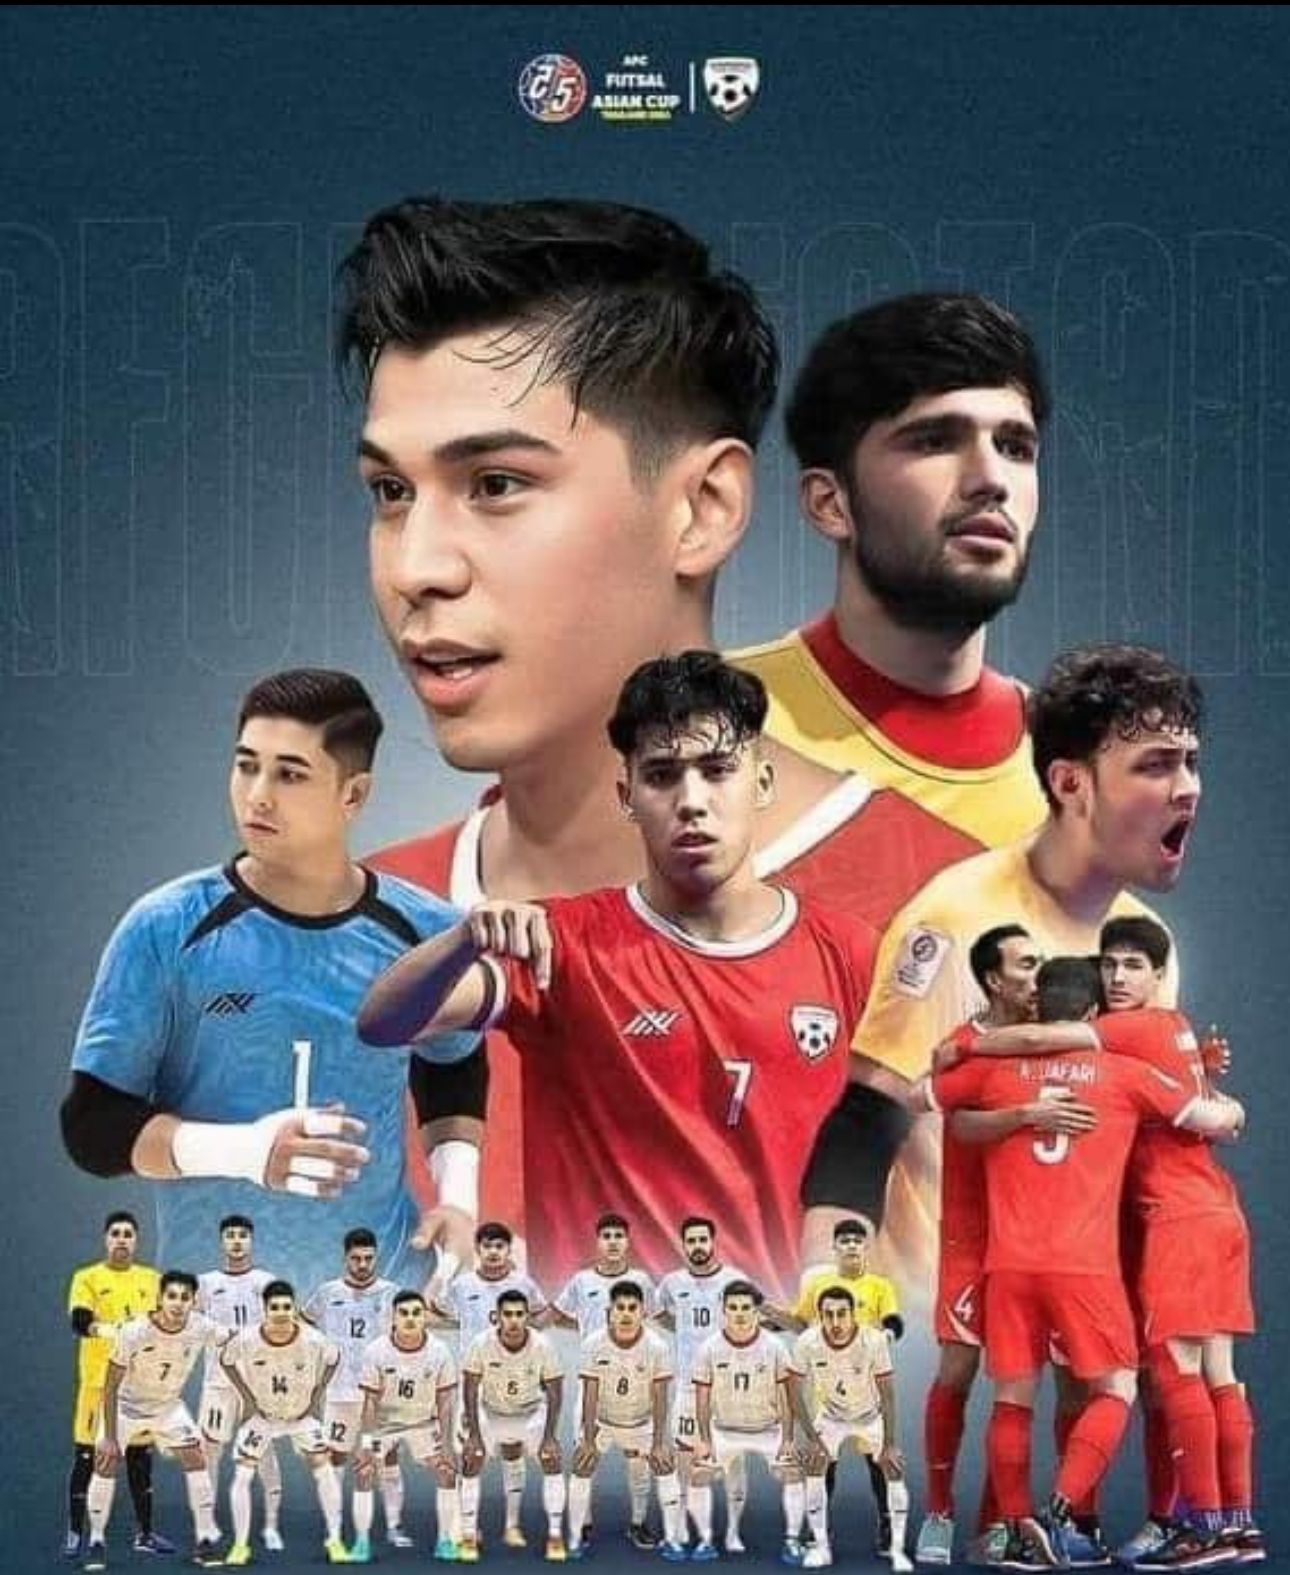 Congratulations to the Afghan National Futsal team